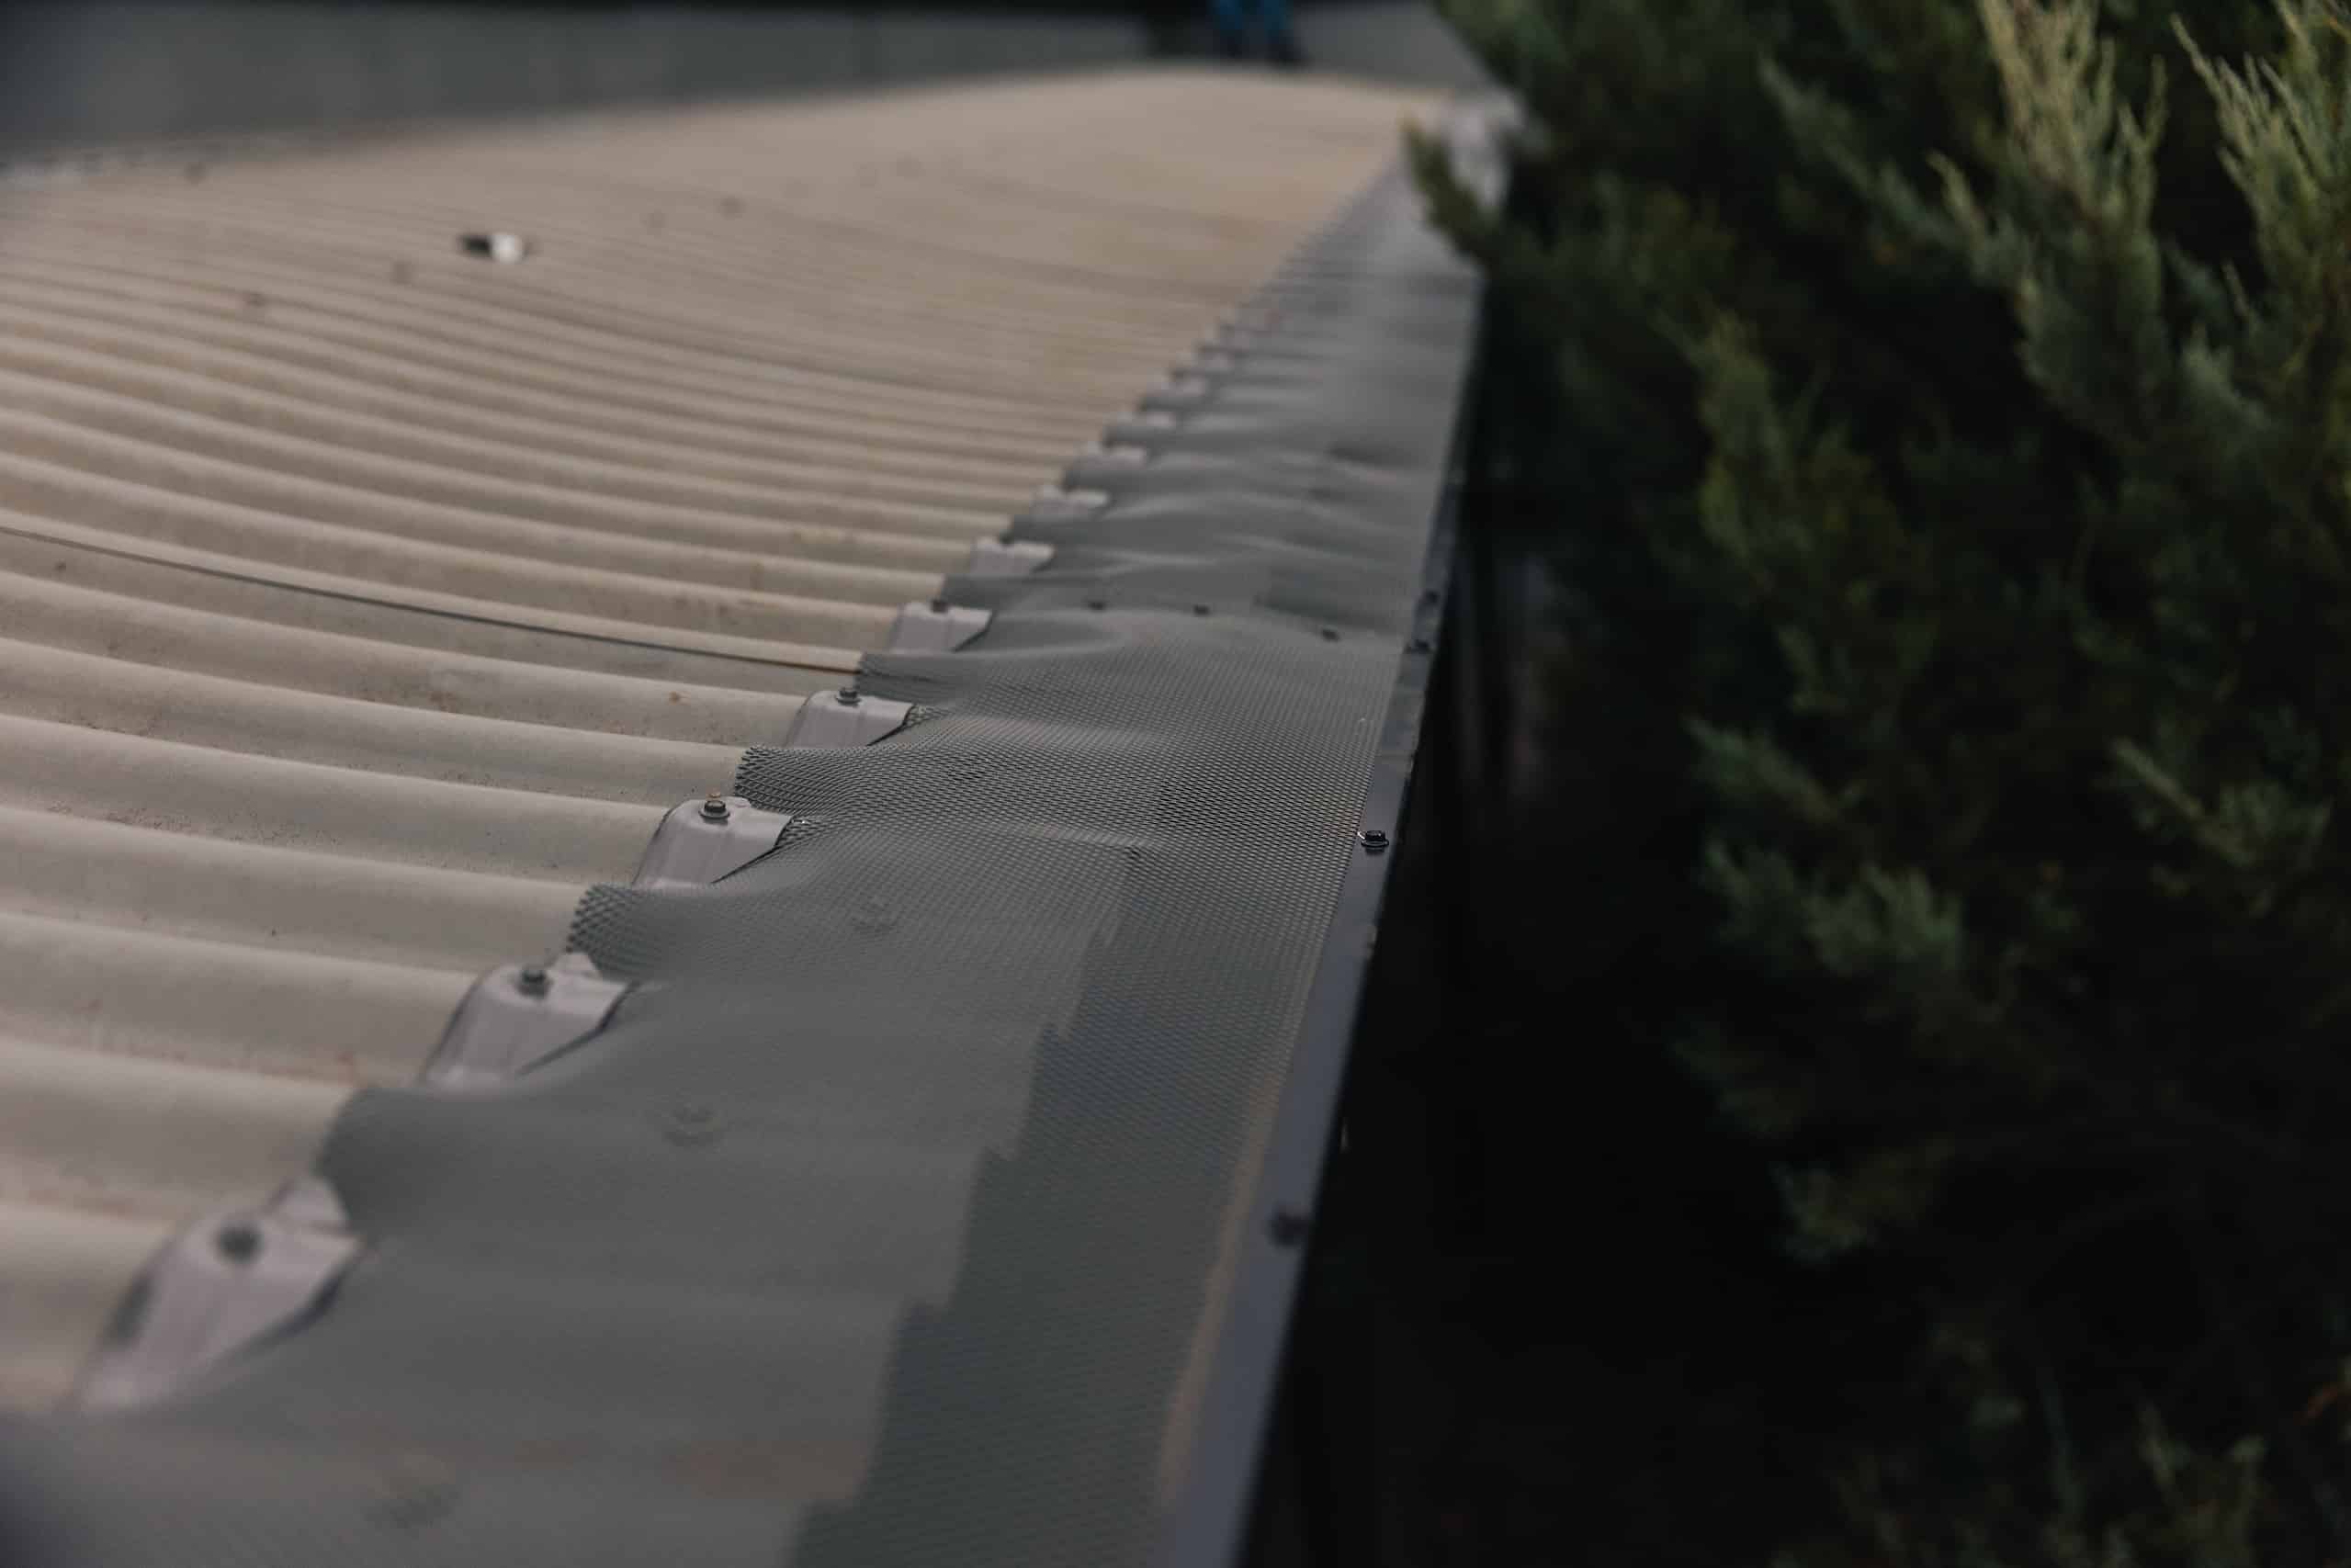 Powder-coated aluminium gutter guard blending with a residential roof, offering durable protection against birds and reducing gutter maintenance.